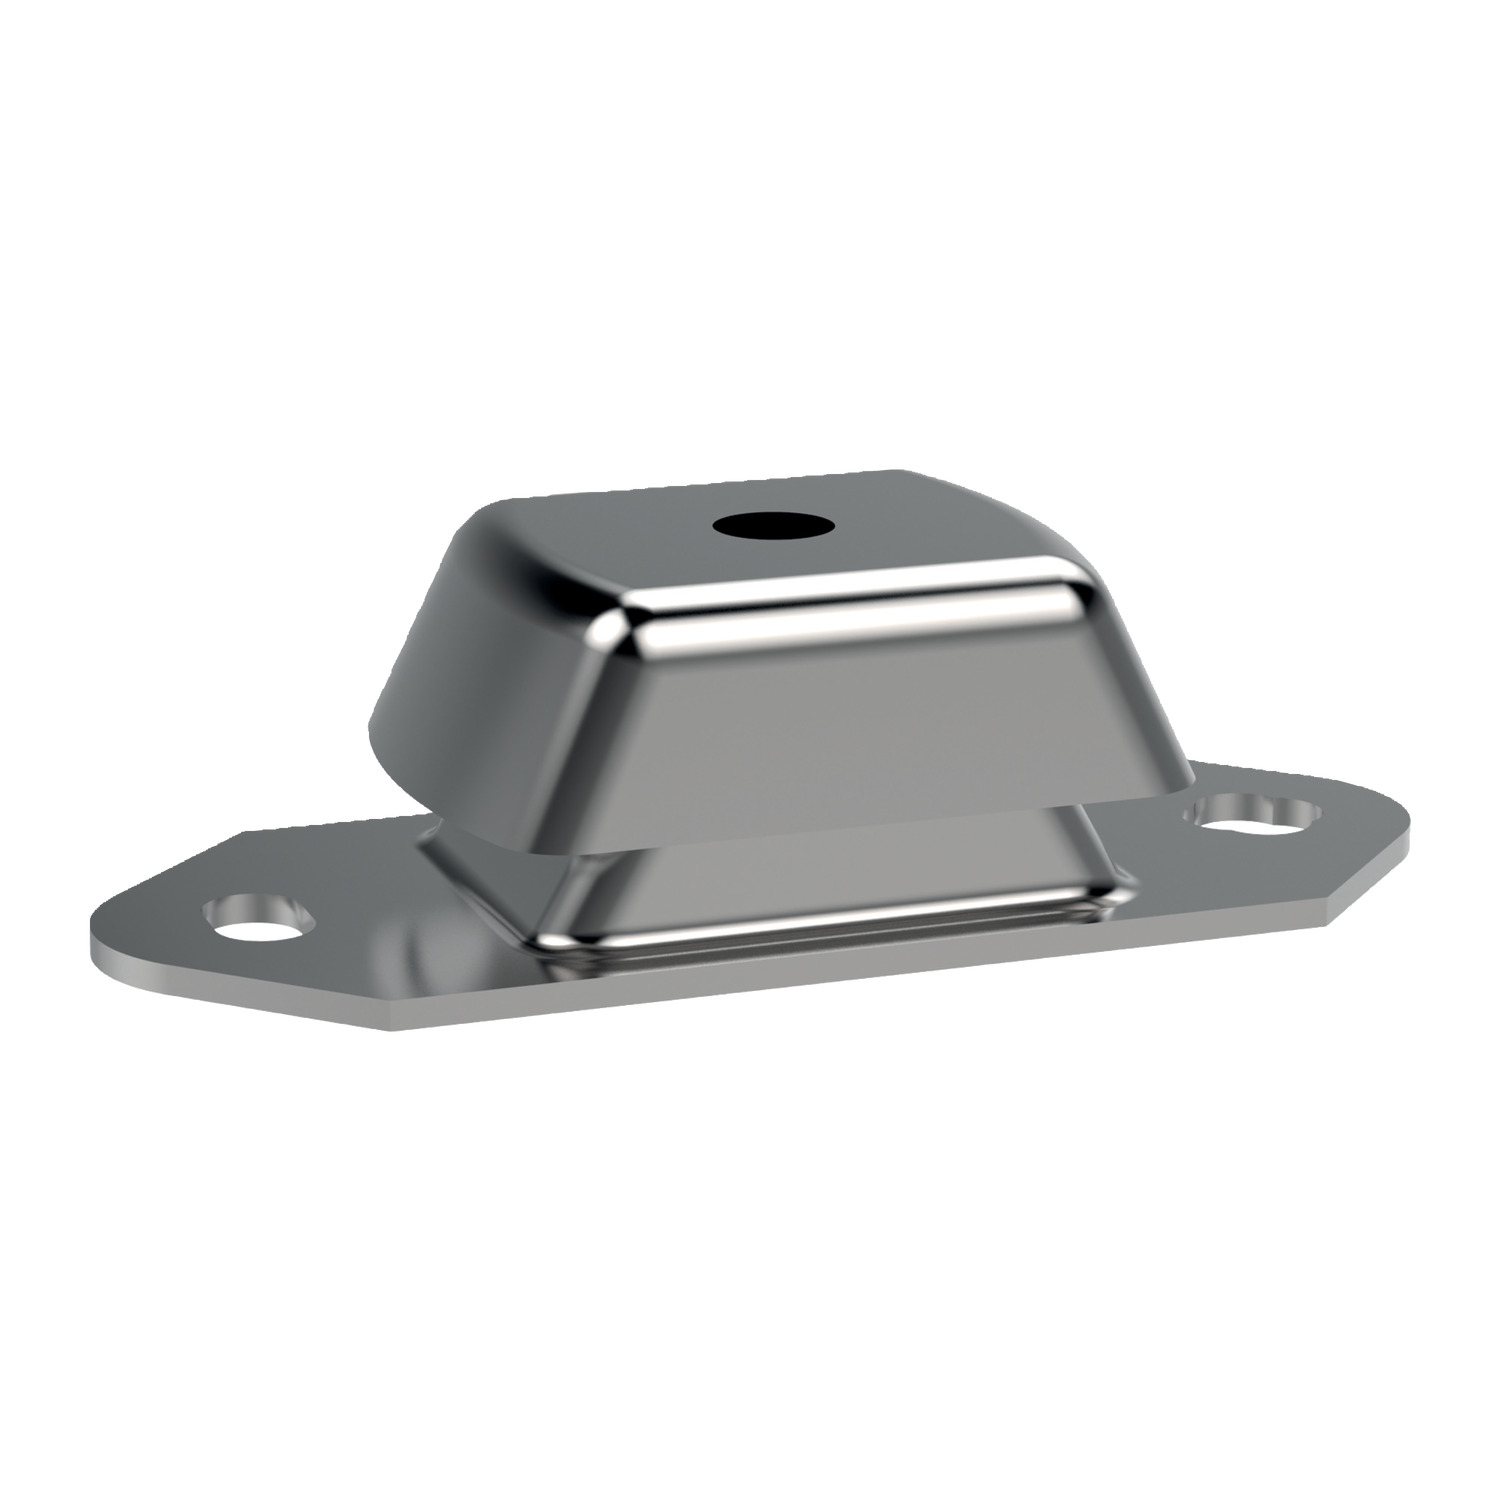 Fail Safe Anti-Vibration Mounts Our Fail-safe Anti-vibration Mounts complement our 'standard' range and are suitable for use with heavy machinery, marine engines, pumps, compressors and more. They come in steel and stainless steel.